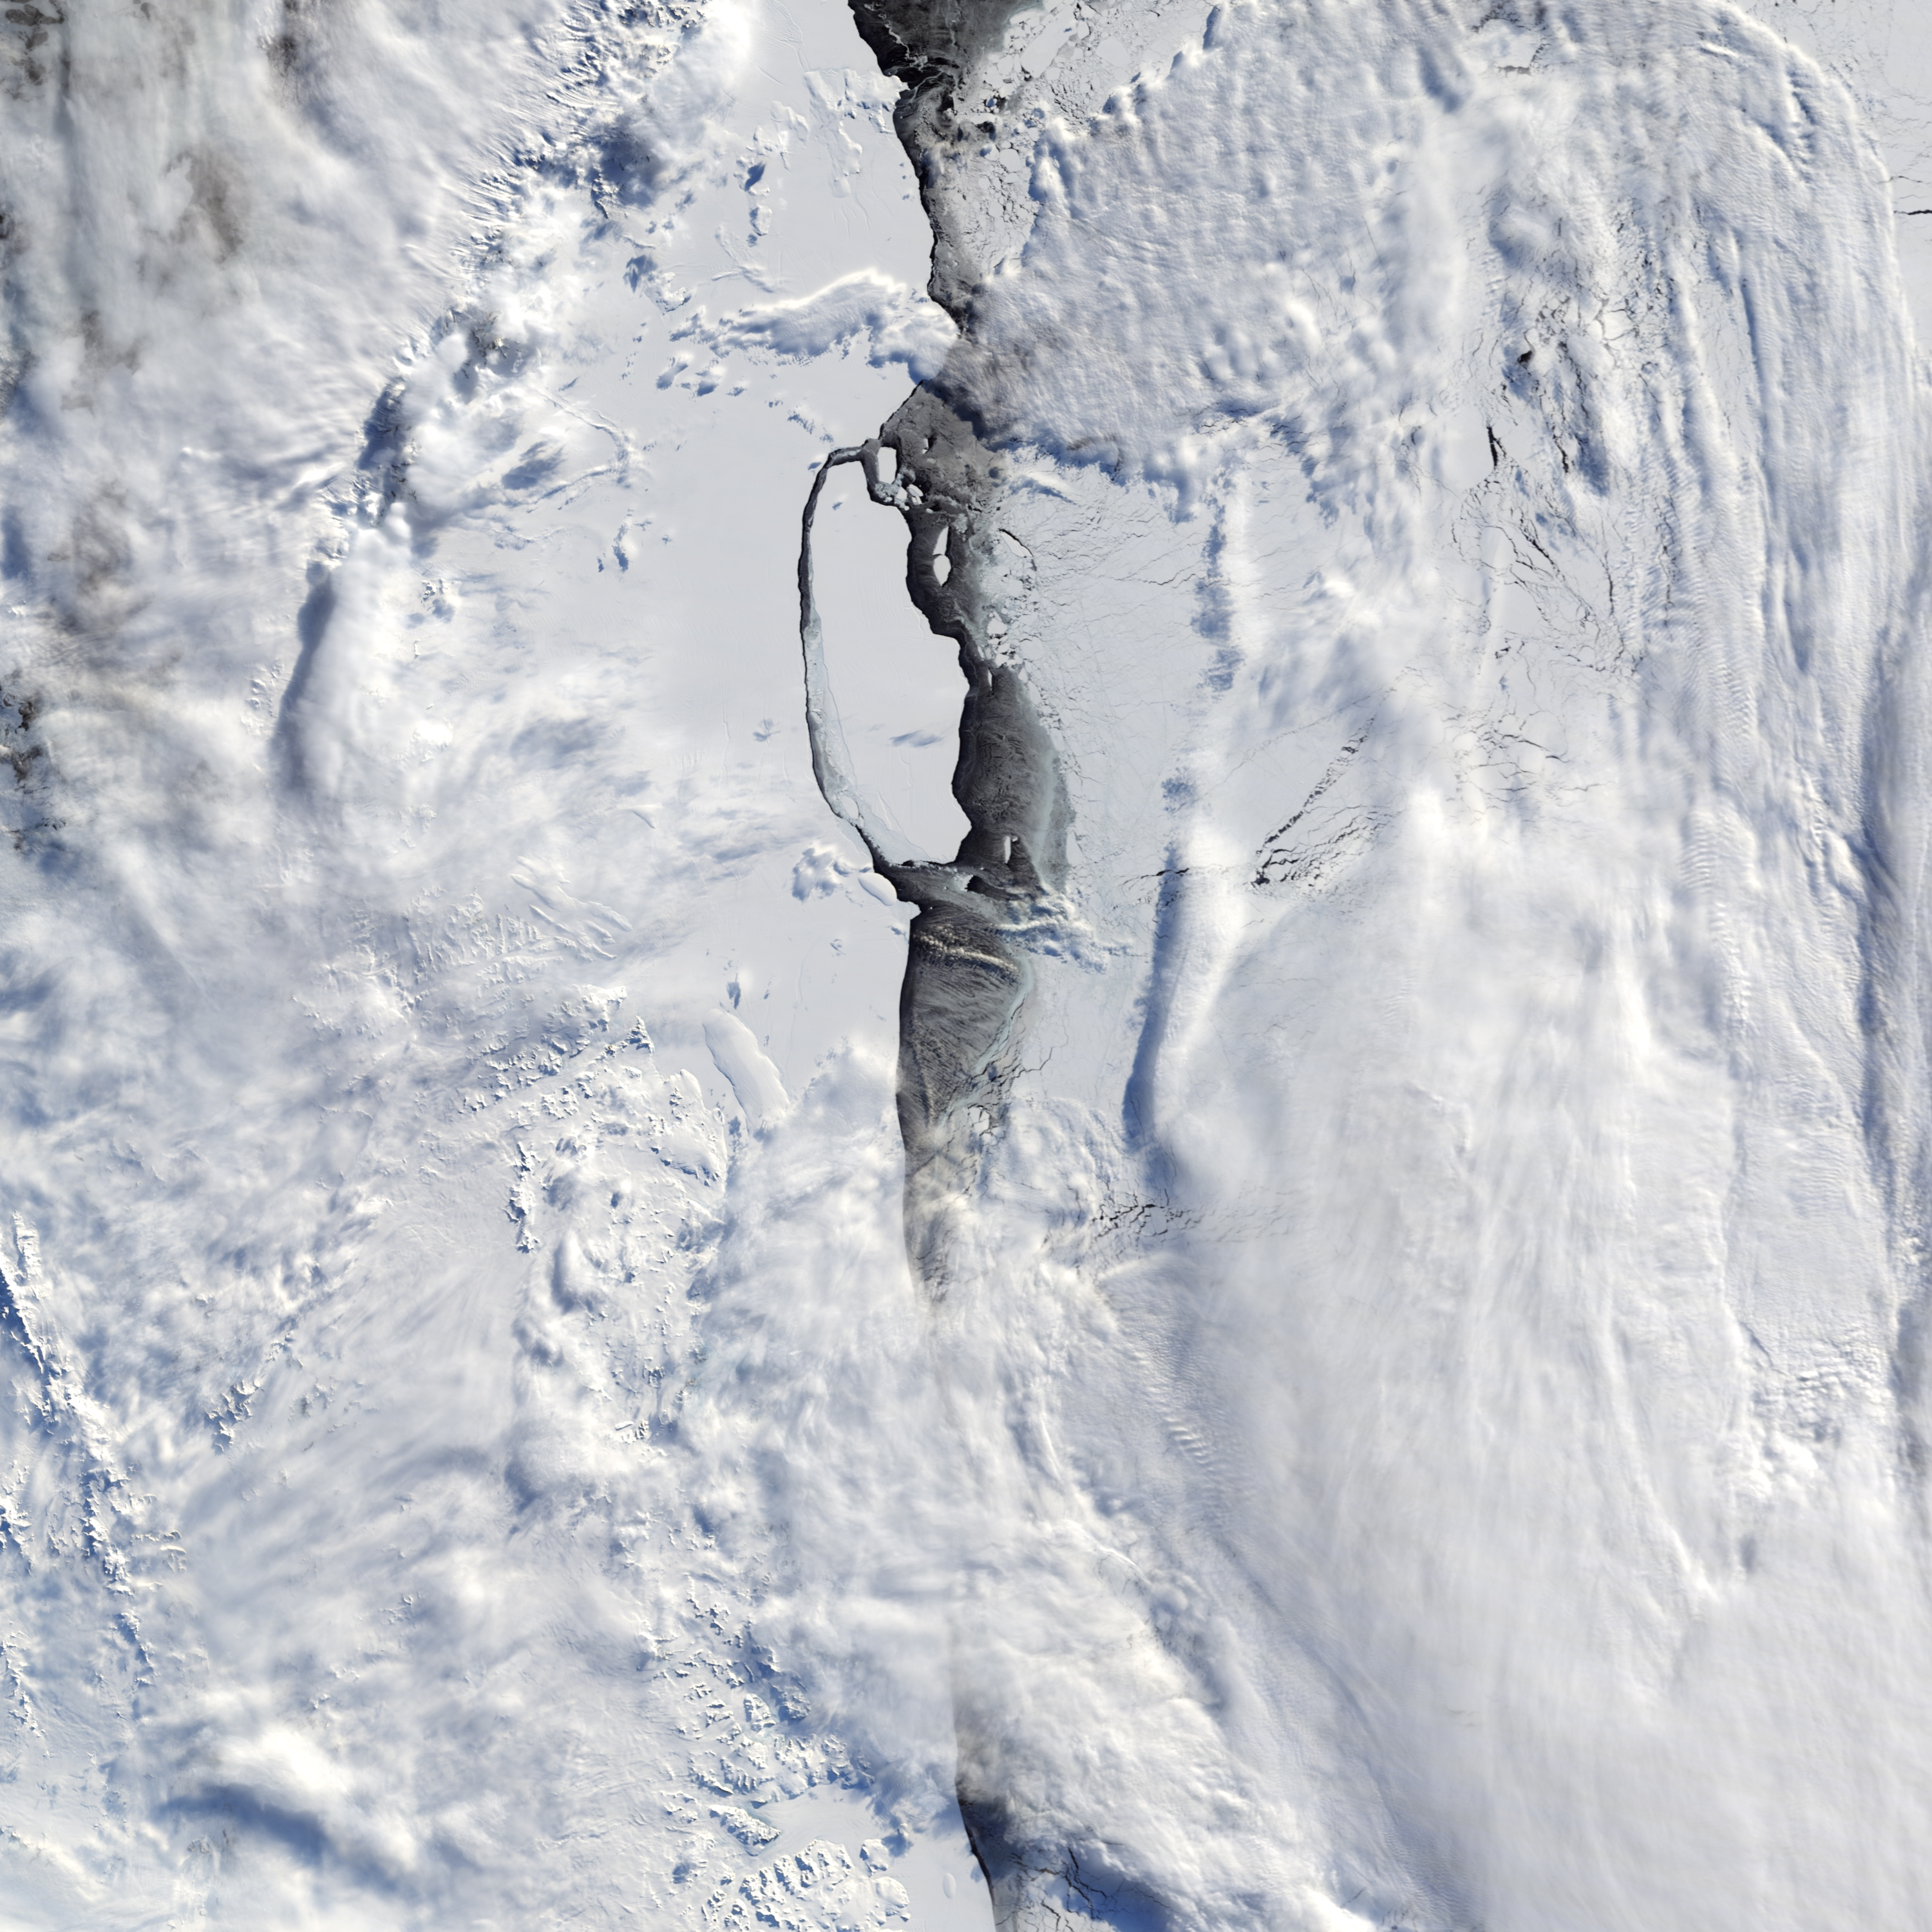 Daylight Returns to Larsen C - related image preview